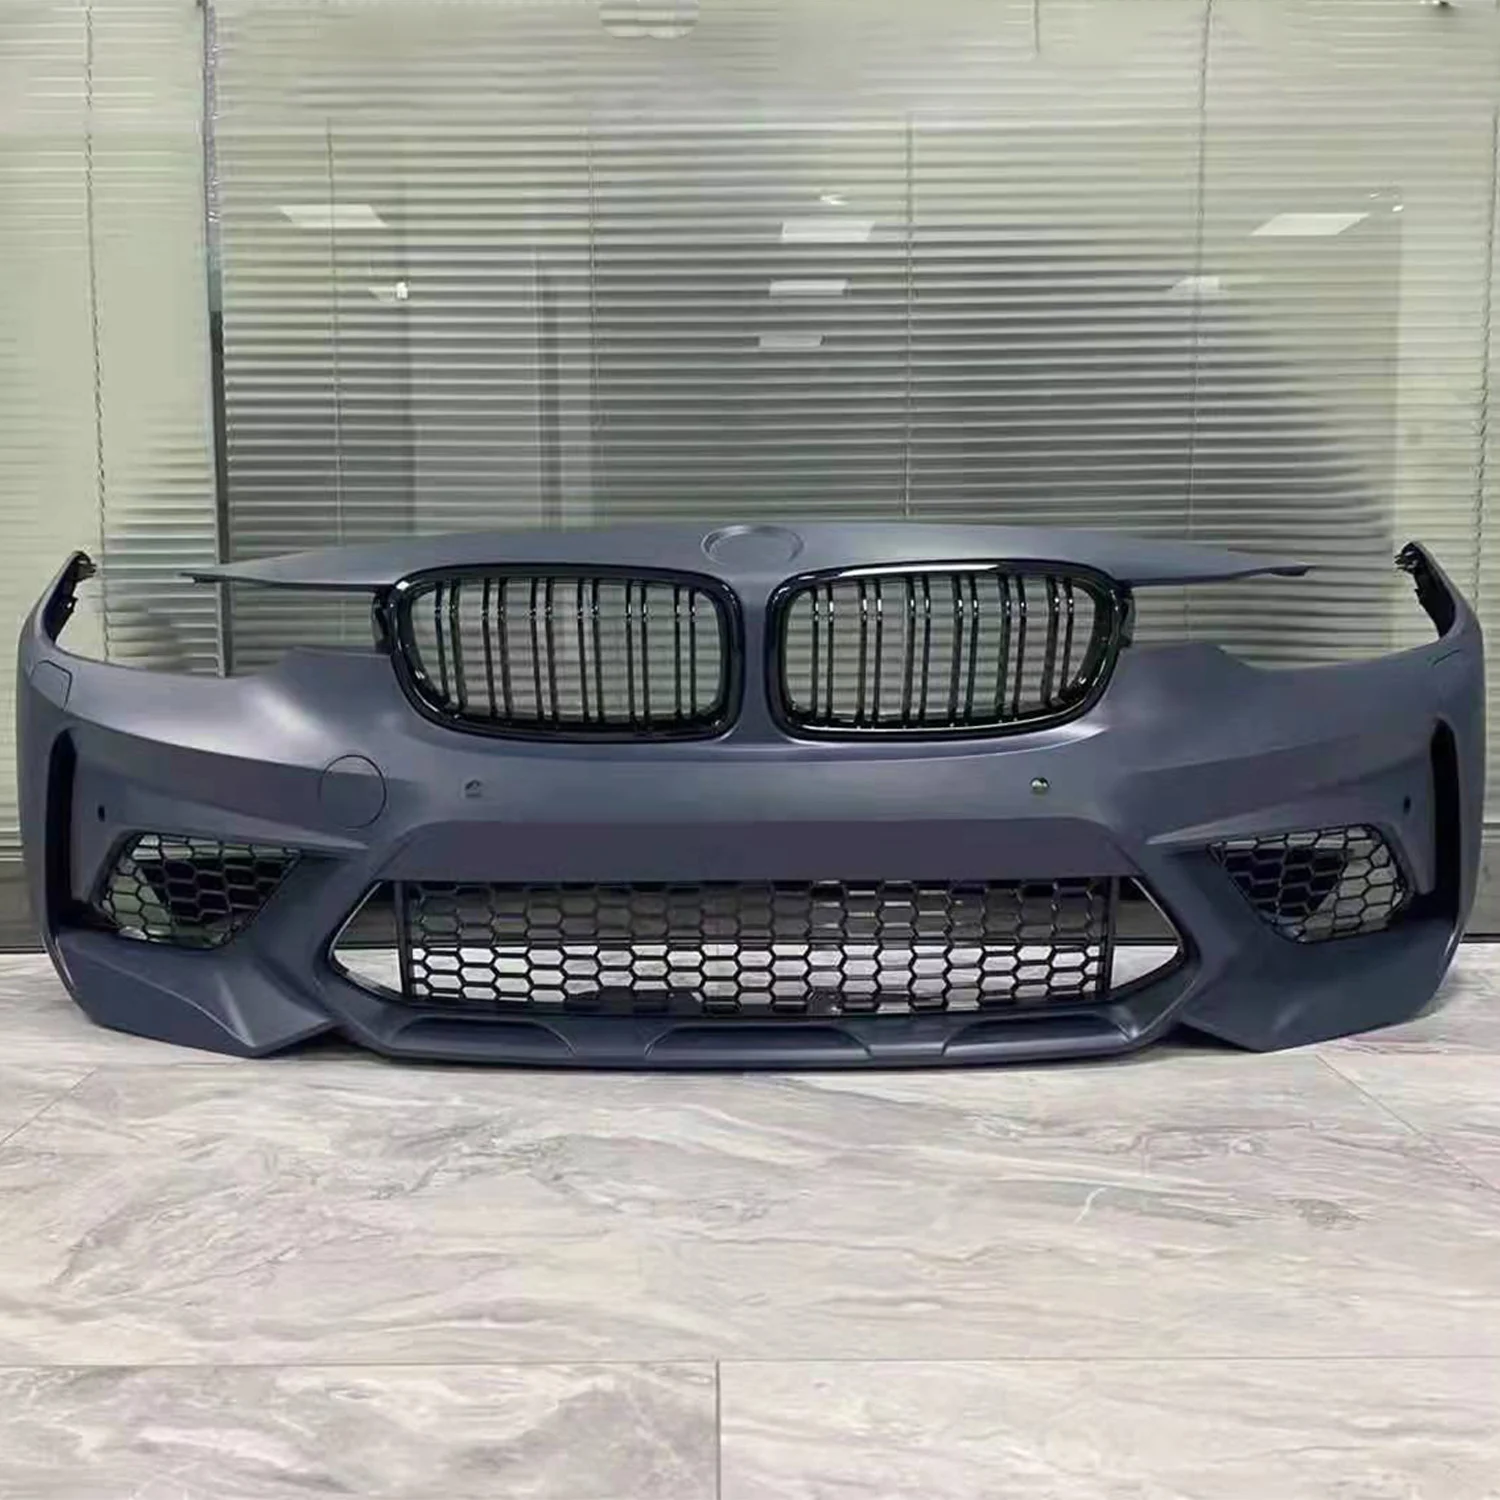 Car body kits auto spare parts pp bumpers complete for BMW 3 series F30 upgrade to M3C model with front bumper grilles